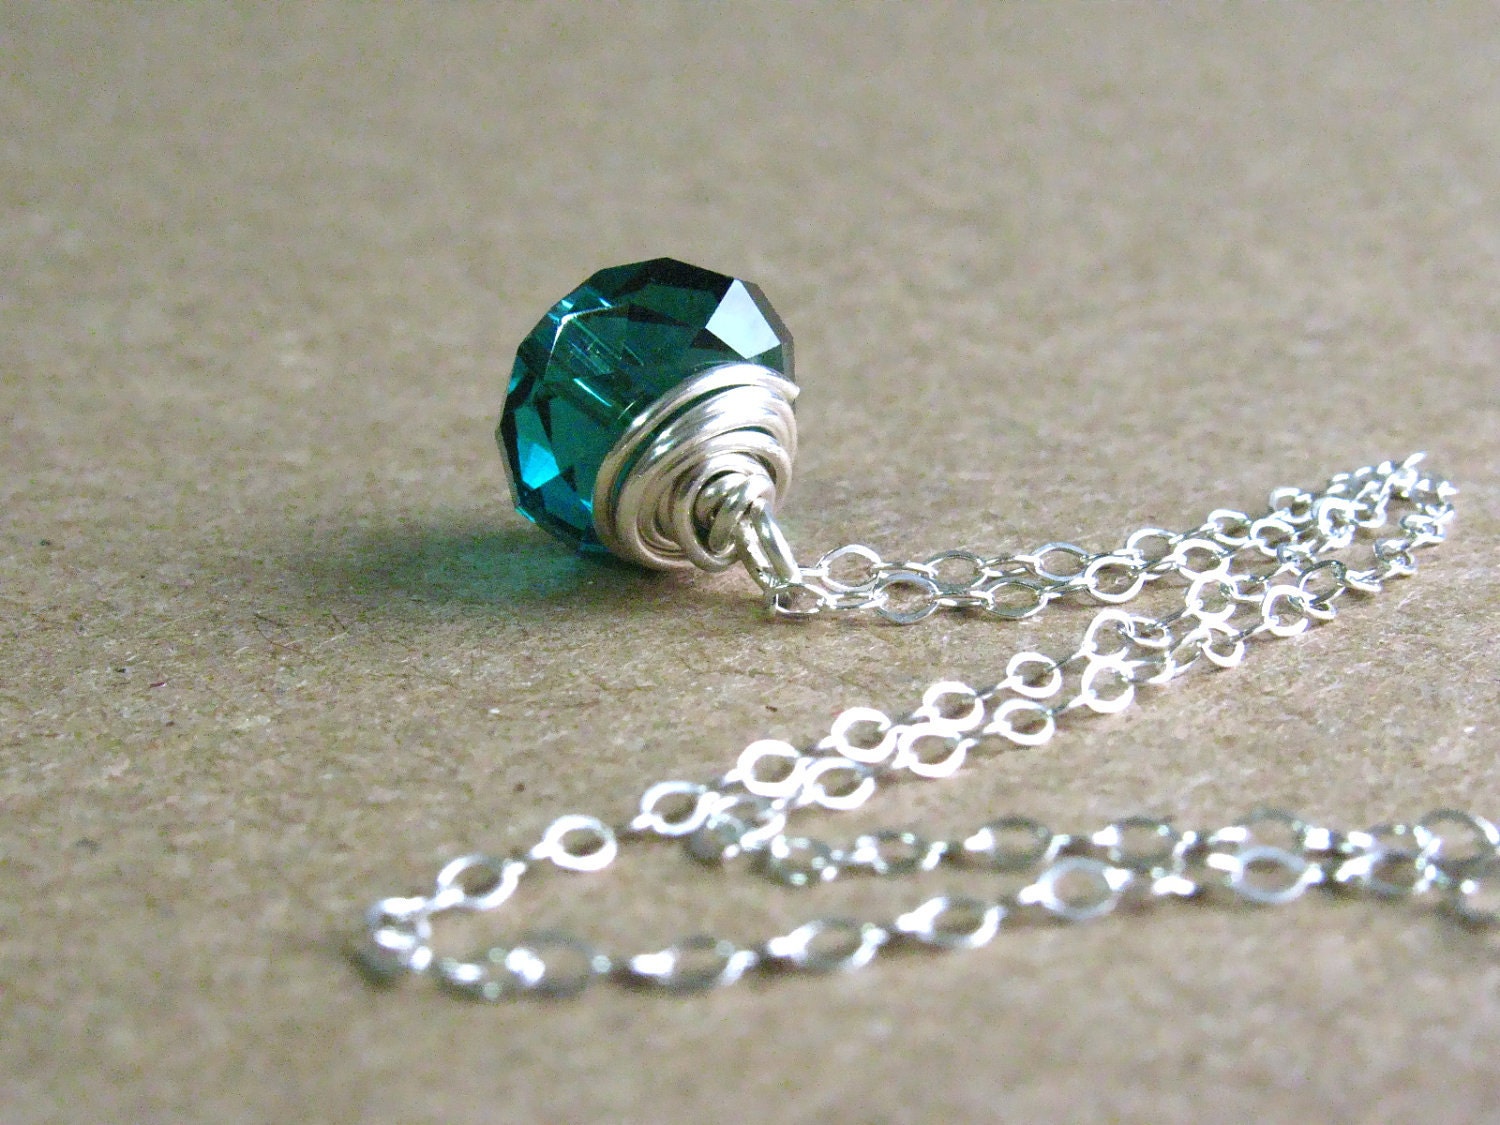 Crystal Necklace - Teal Chinese Crystal on Sterling Silver by Luv Laugh Sparkle